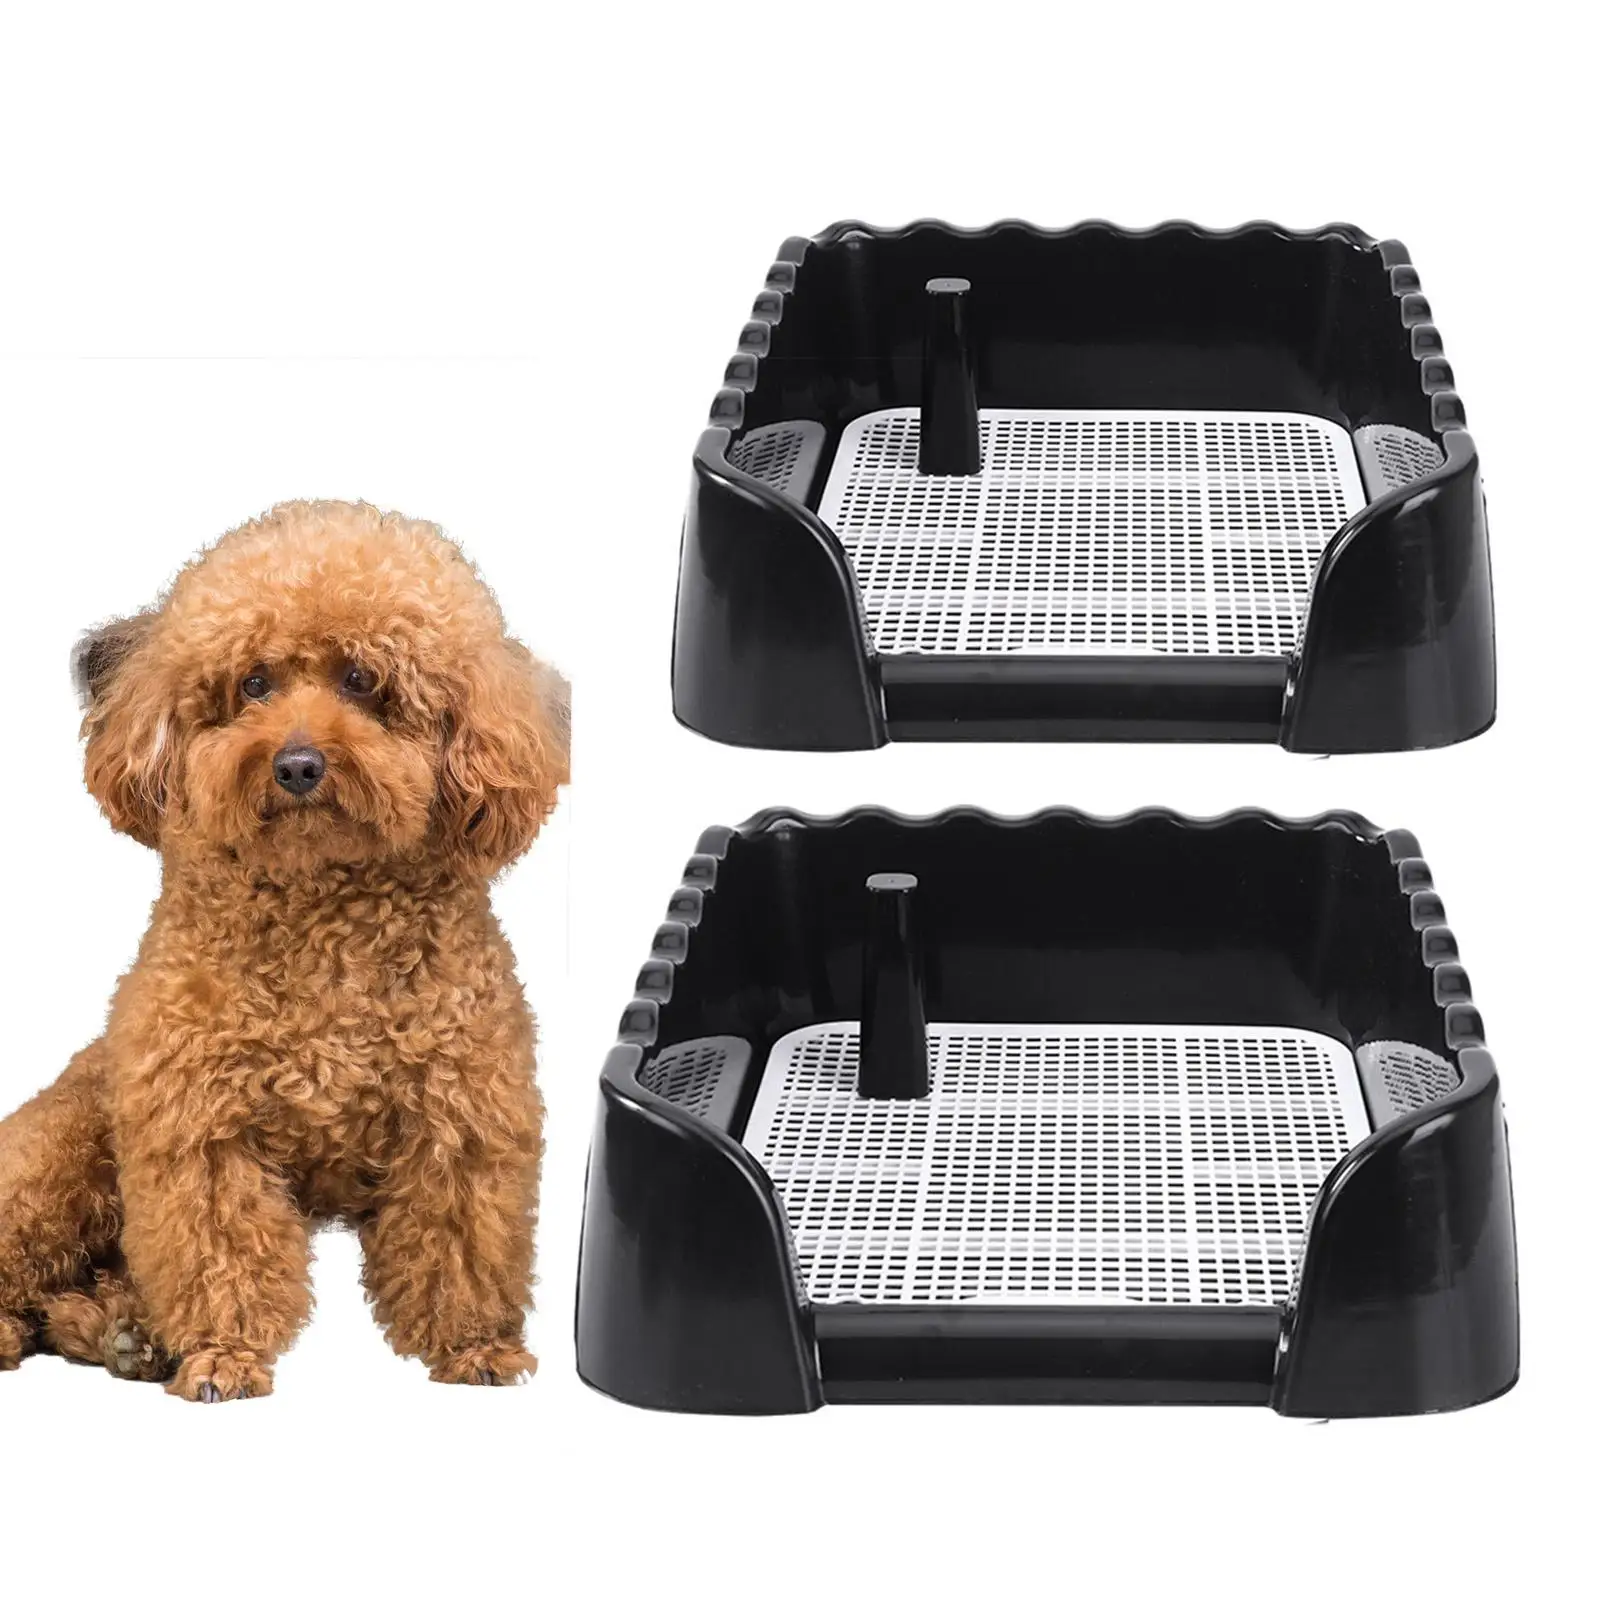 Dog Toilet Puppy Potty Tray Cleaning Tool Indoor Outdoor for Cat